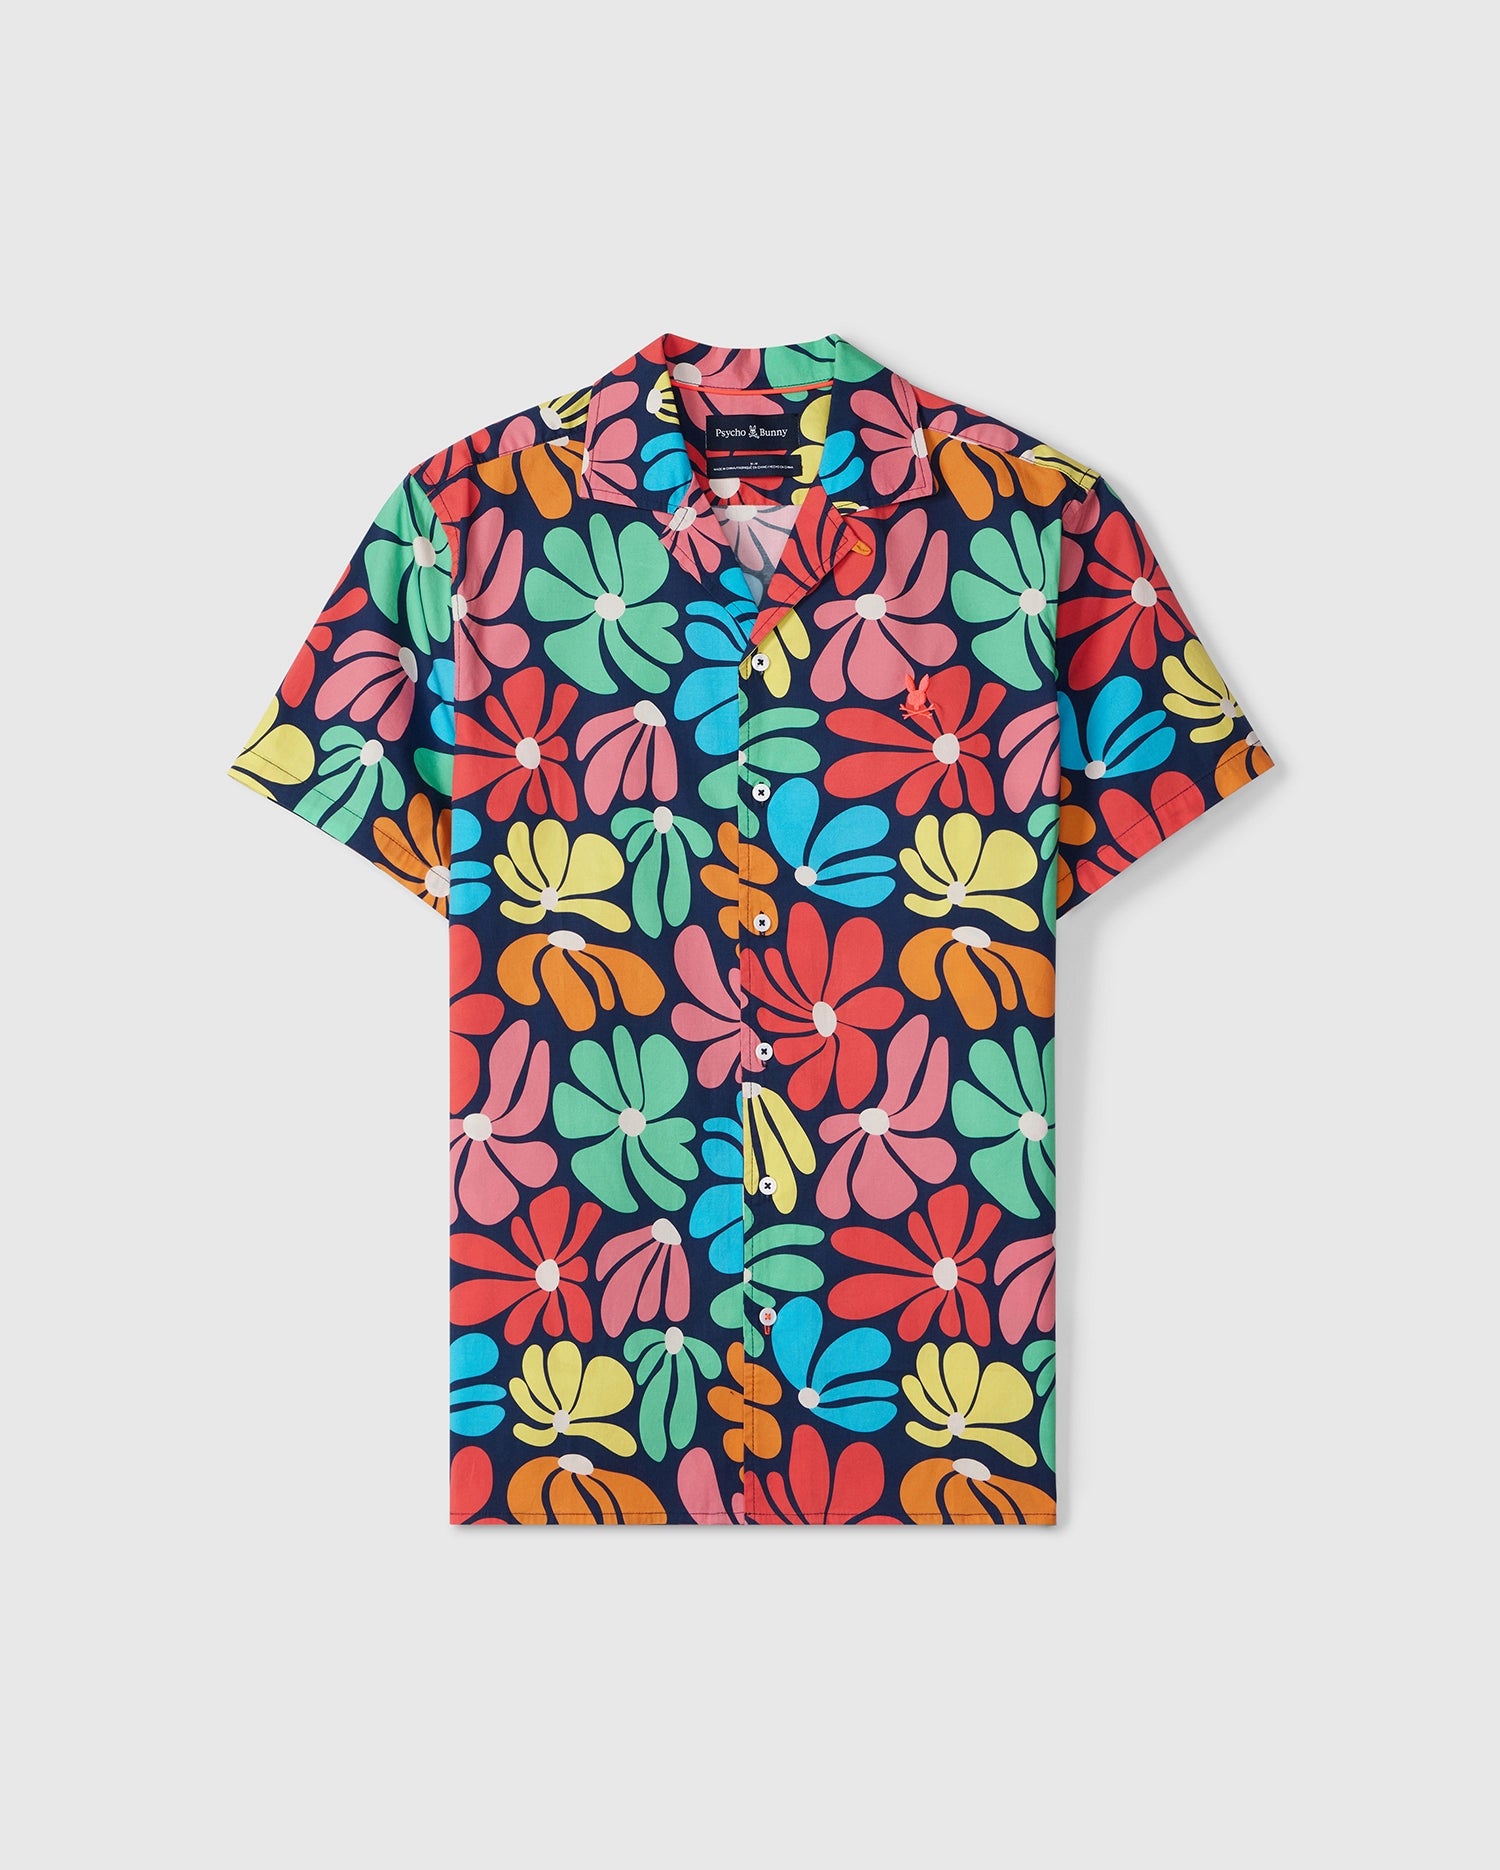 A short-sleeved button-up floral print shirt with a vibrant, colorful pattern featuring large, overlapping flowers in shades of red, yellow, green, and blue on a dark background. This sun-soaked statement piece includes a collar and front pocket. Ideal for pairing with its matching set. The product is the Psycho Bunny MENS MENTZ ALL OVER PRINT SHIRT - B6Q396B200.